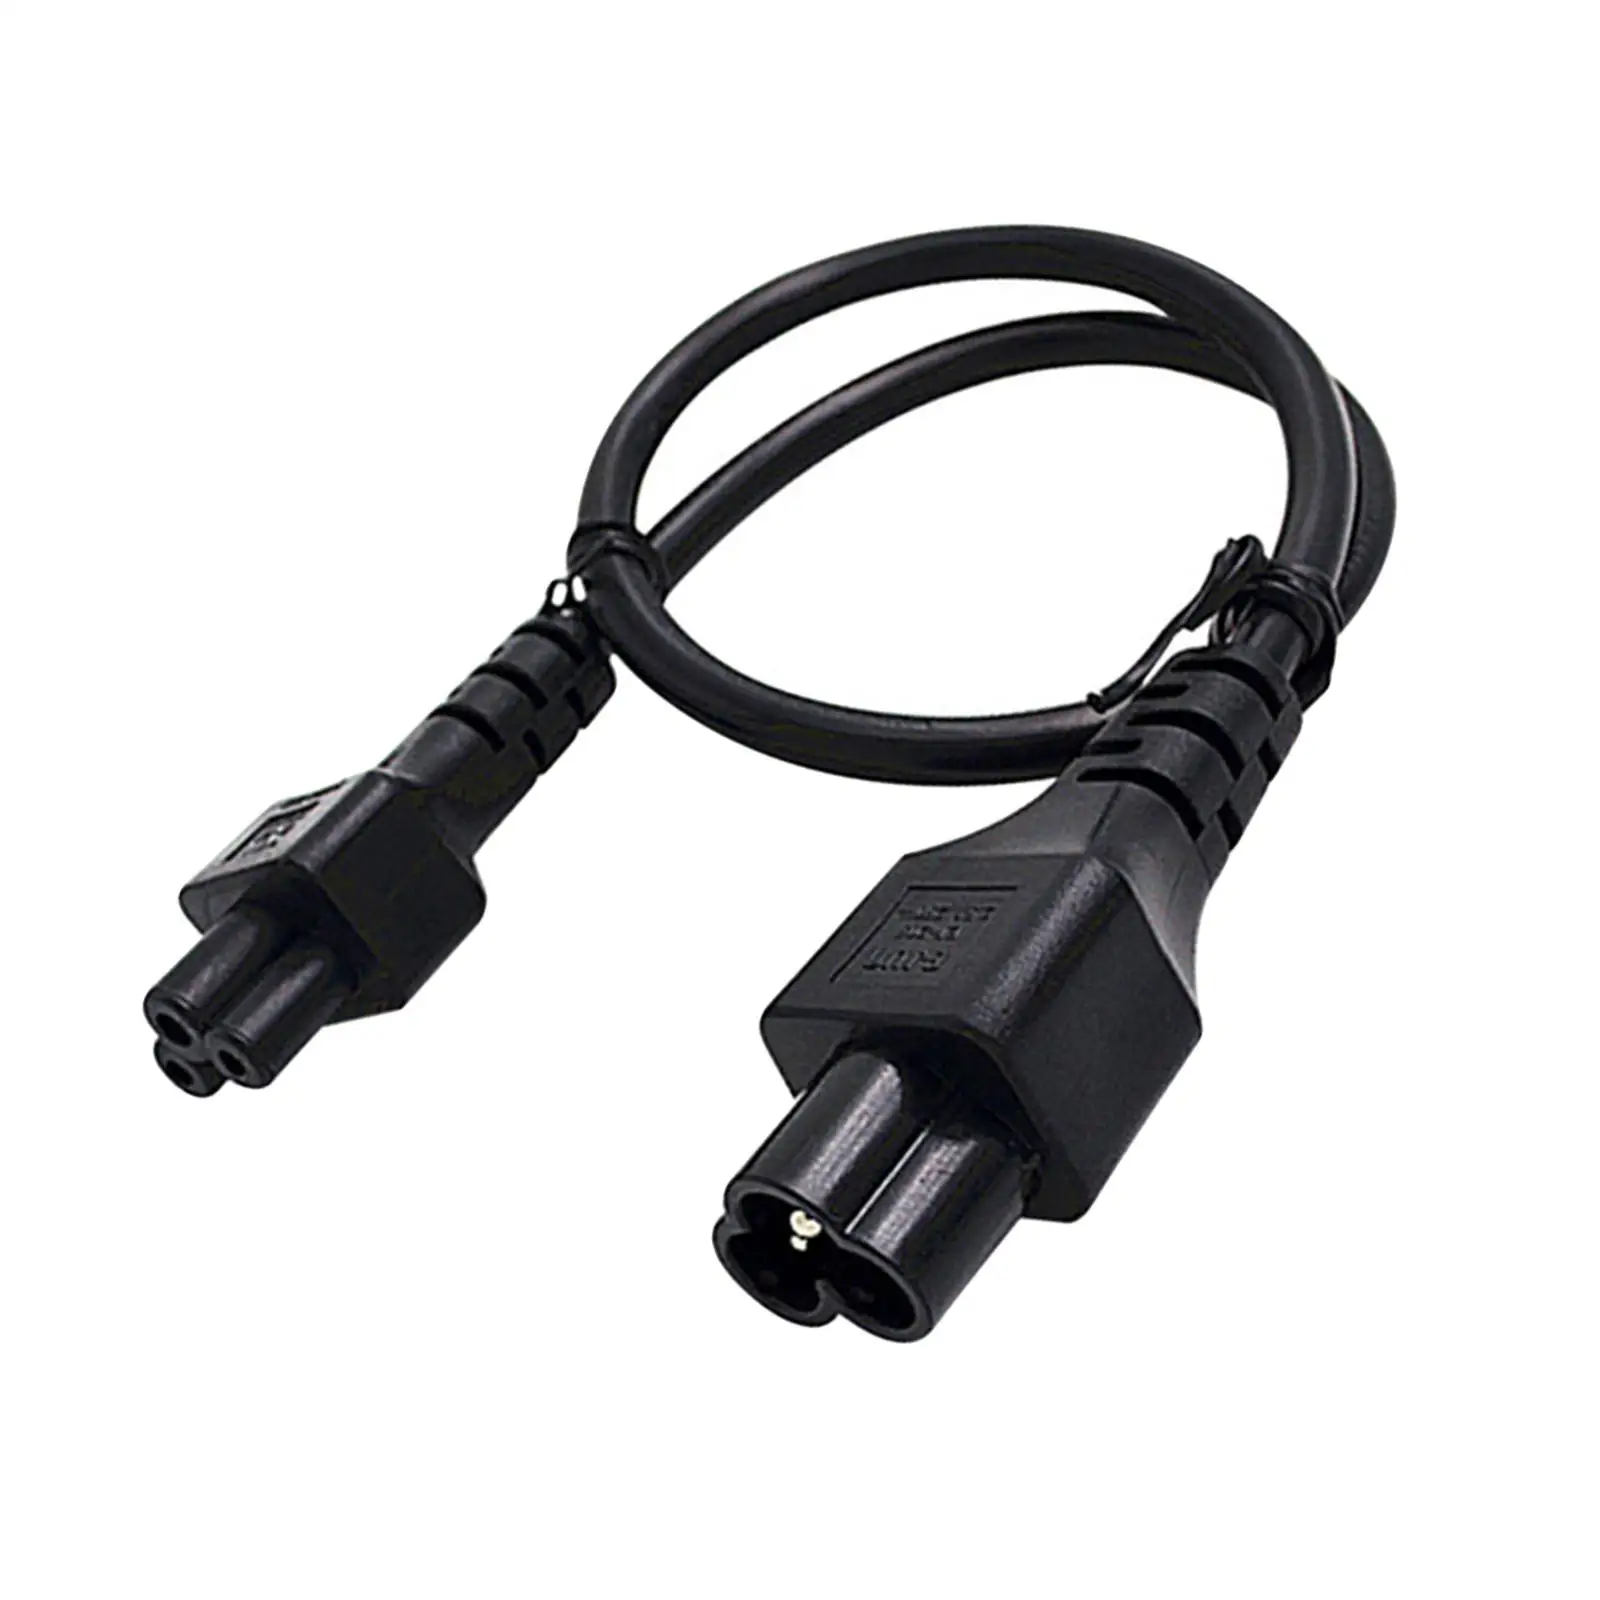 IEC320-C6 to C5 Power Cable Cord Male to Female 2ft/0.6M Low Resistance for Laptop